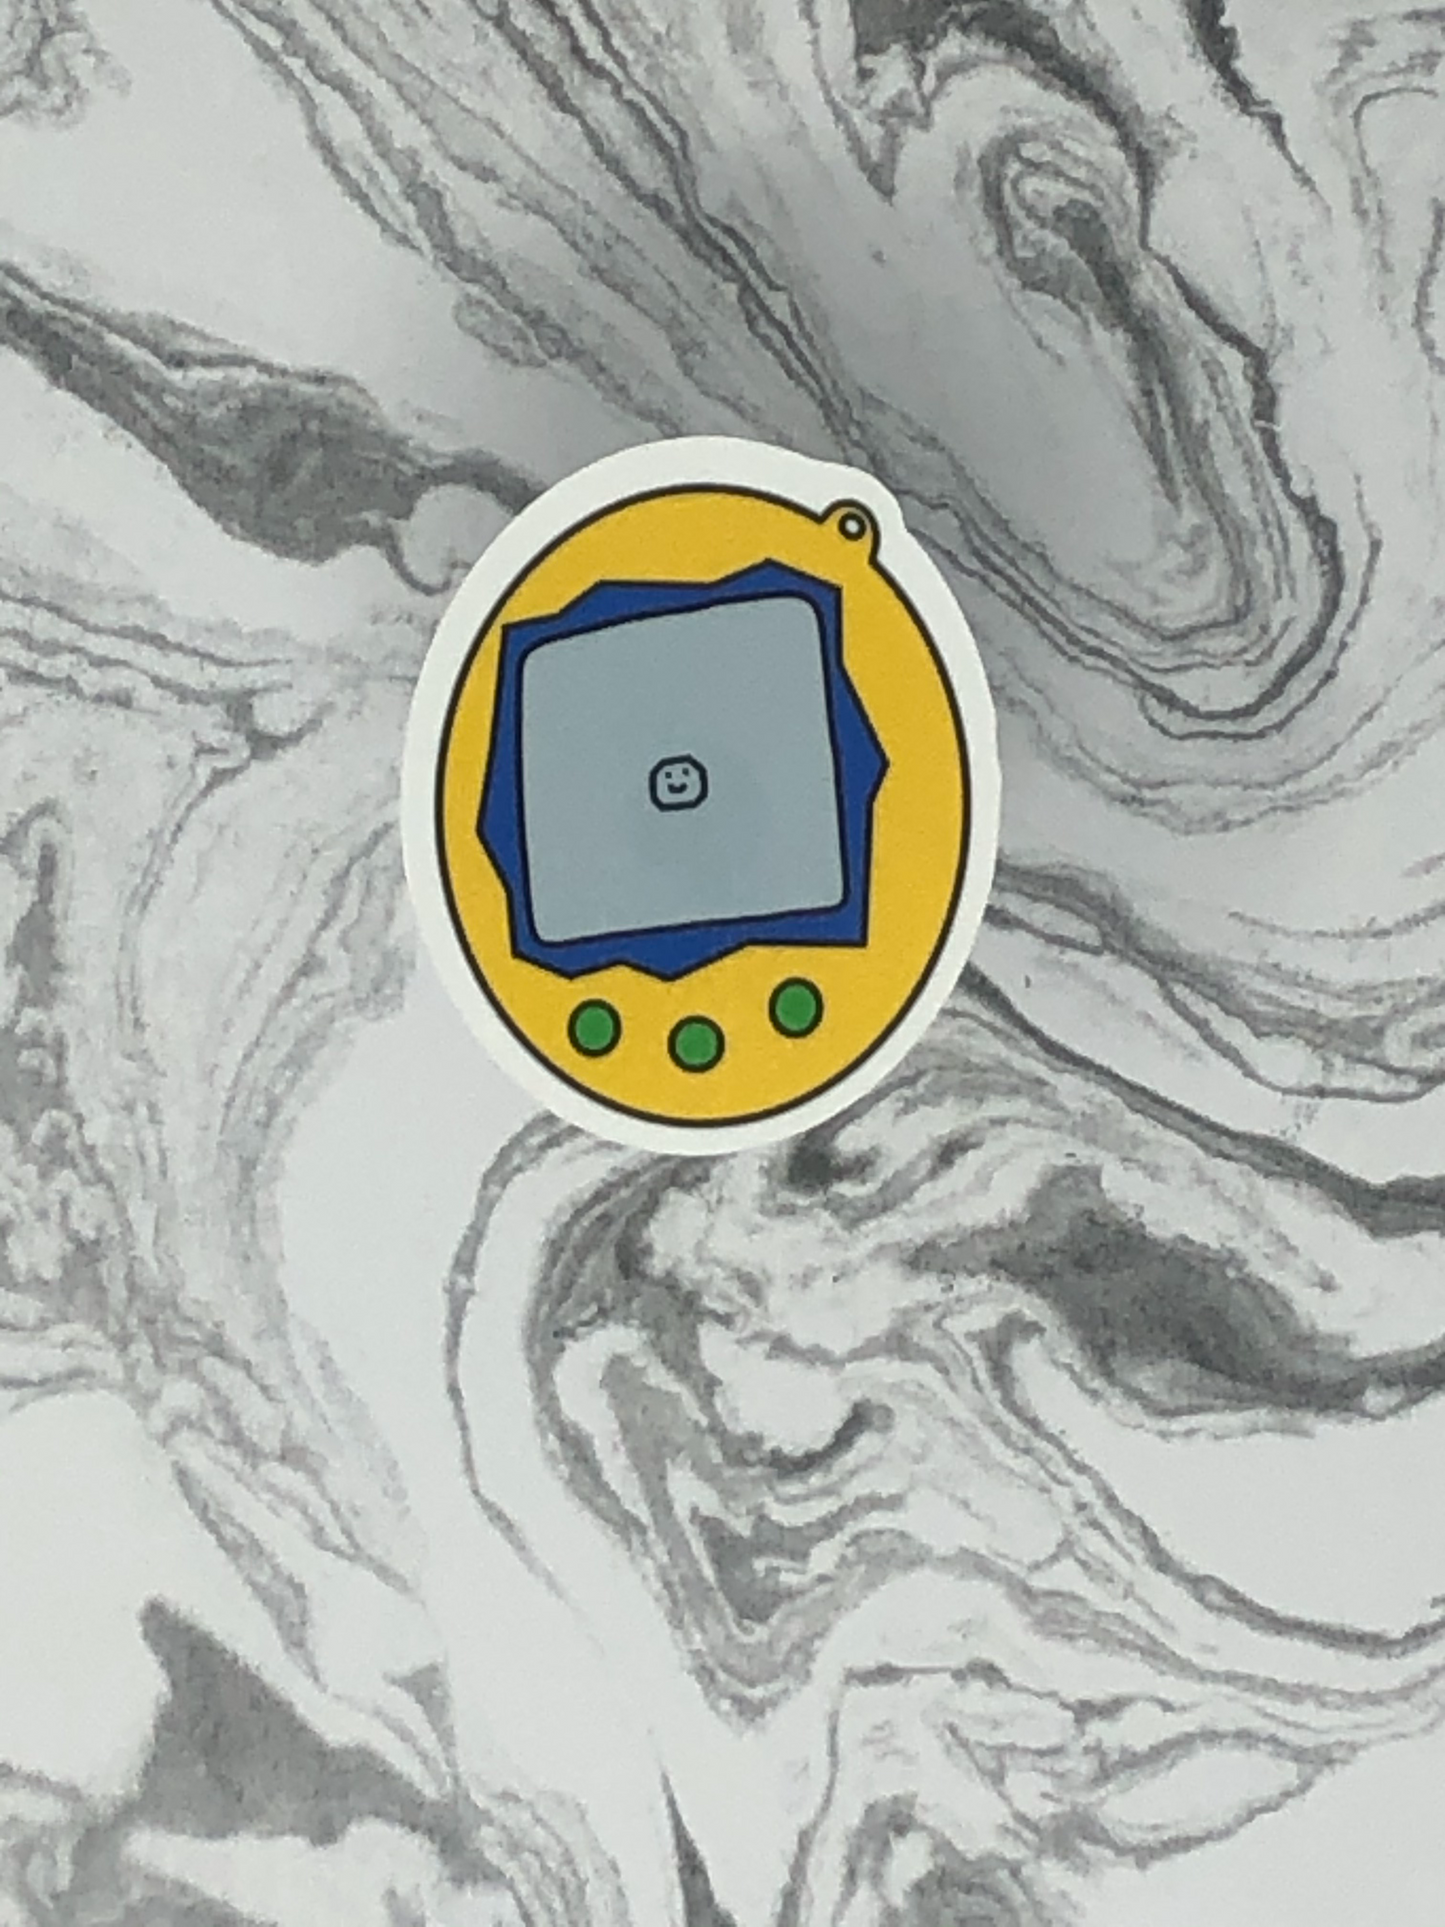 Tamagotchi's Stickers in a Variety of Colors